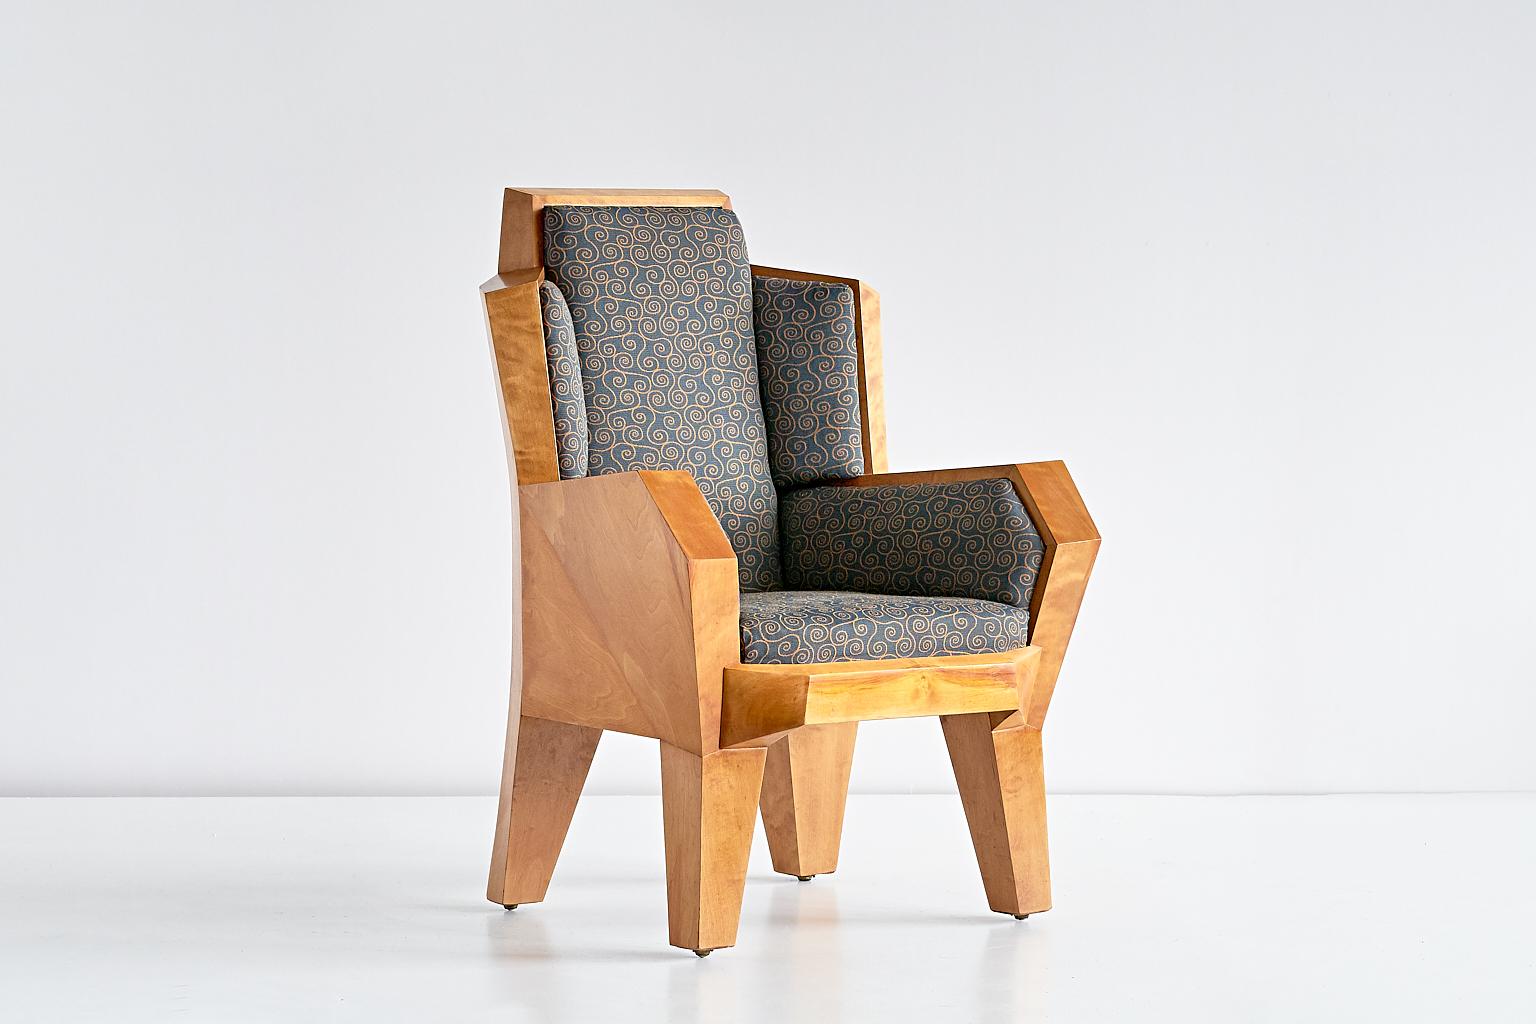 This unique armchair was designed in 1928 by Camillo Cerri specifically for the interior of Haus Reinbach in Stuttgart Germany. The chair was produced in Dornach, Switzerland by August Tobler who executed most of Cerri's designs by hand.
Its rustic